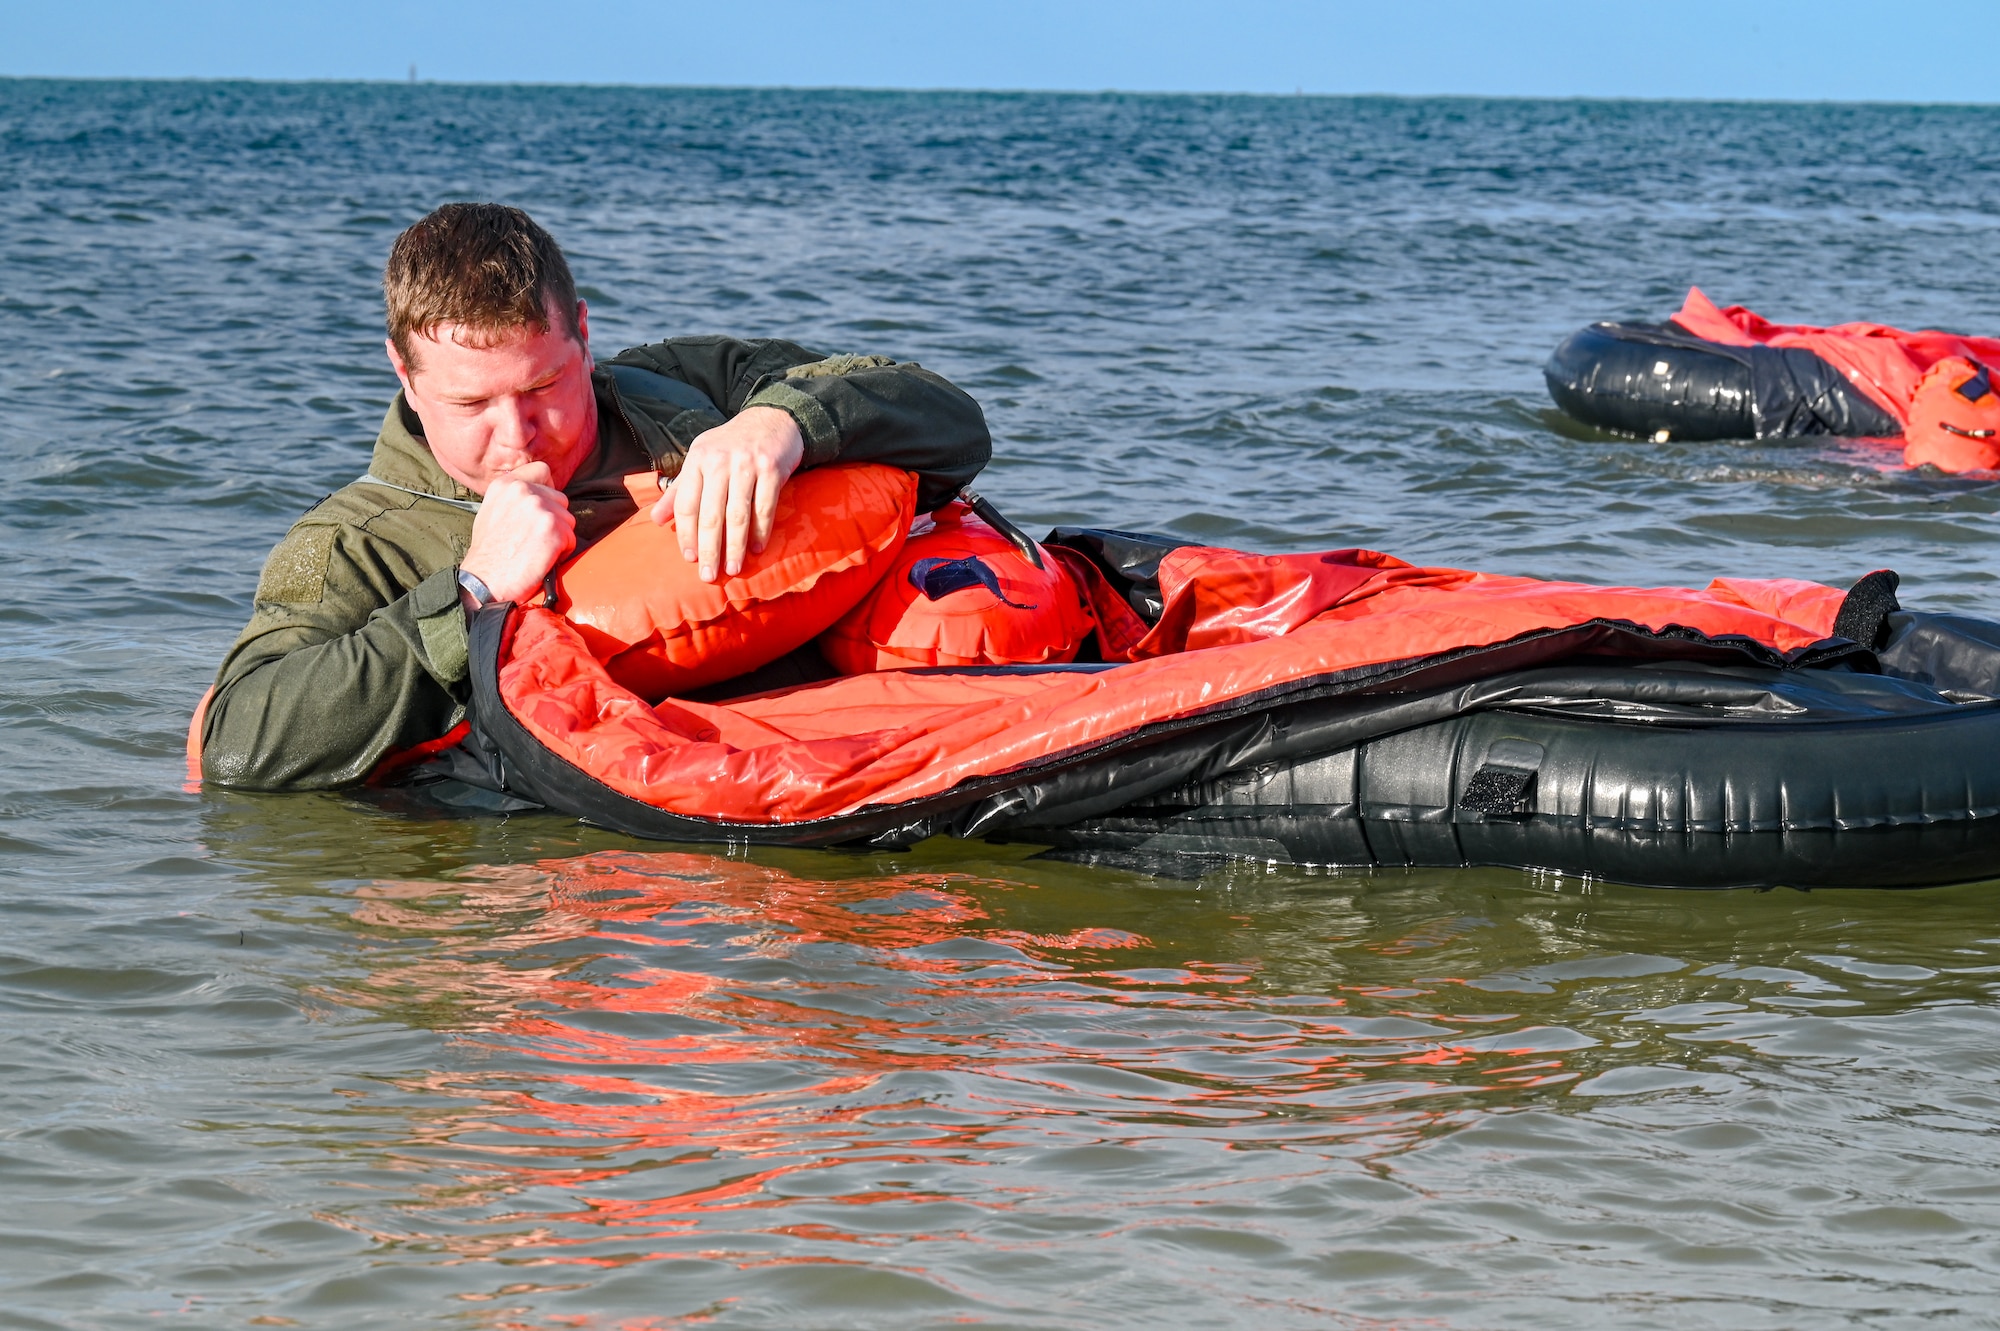 Maj. Tyler McNeely, the chief of tactics assigned to the 910th Operations Support Squadron, inflates a one-person life raft during water survival training on April 19, 2023, at Naval Air Station Key West, Florida.